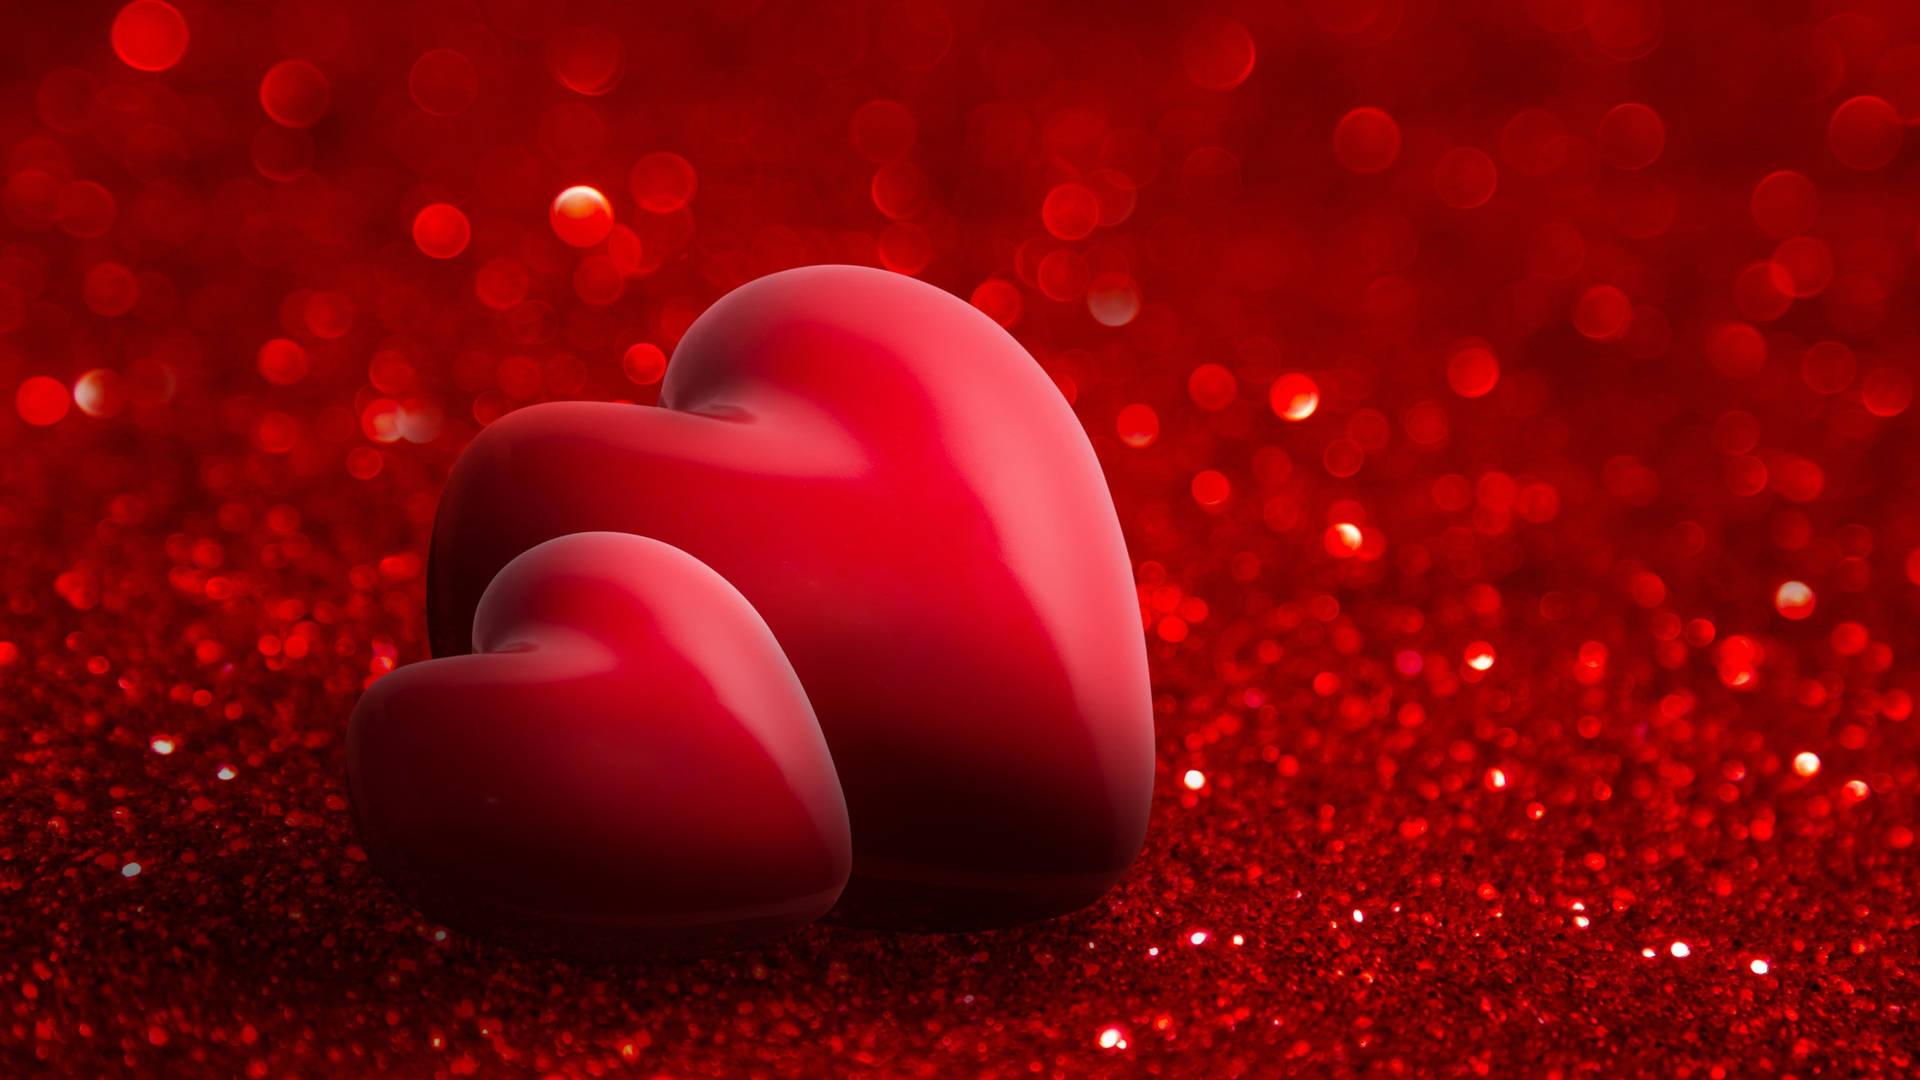 Show Your Love with This Stunning 3D WhatsApp Heart Wallpaper